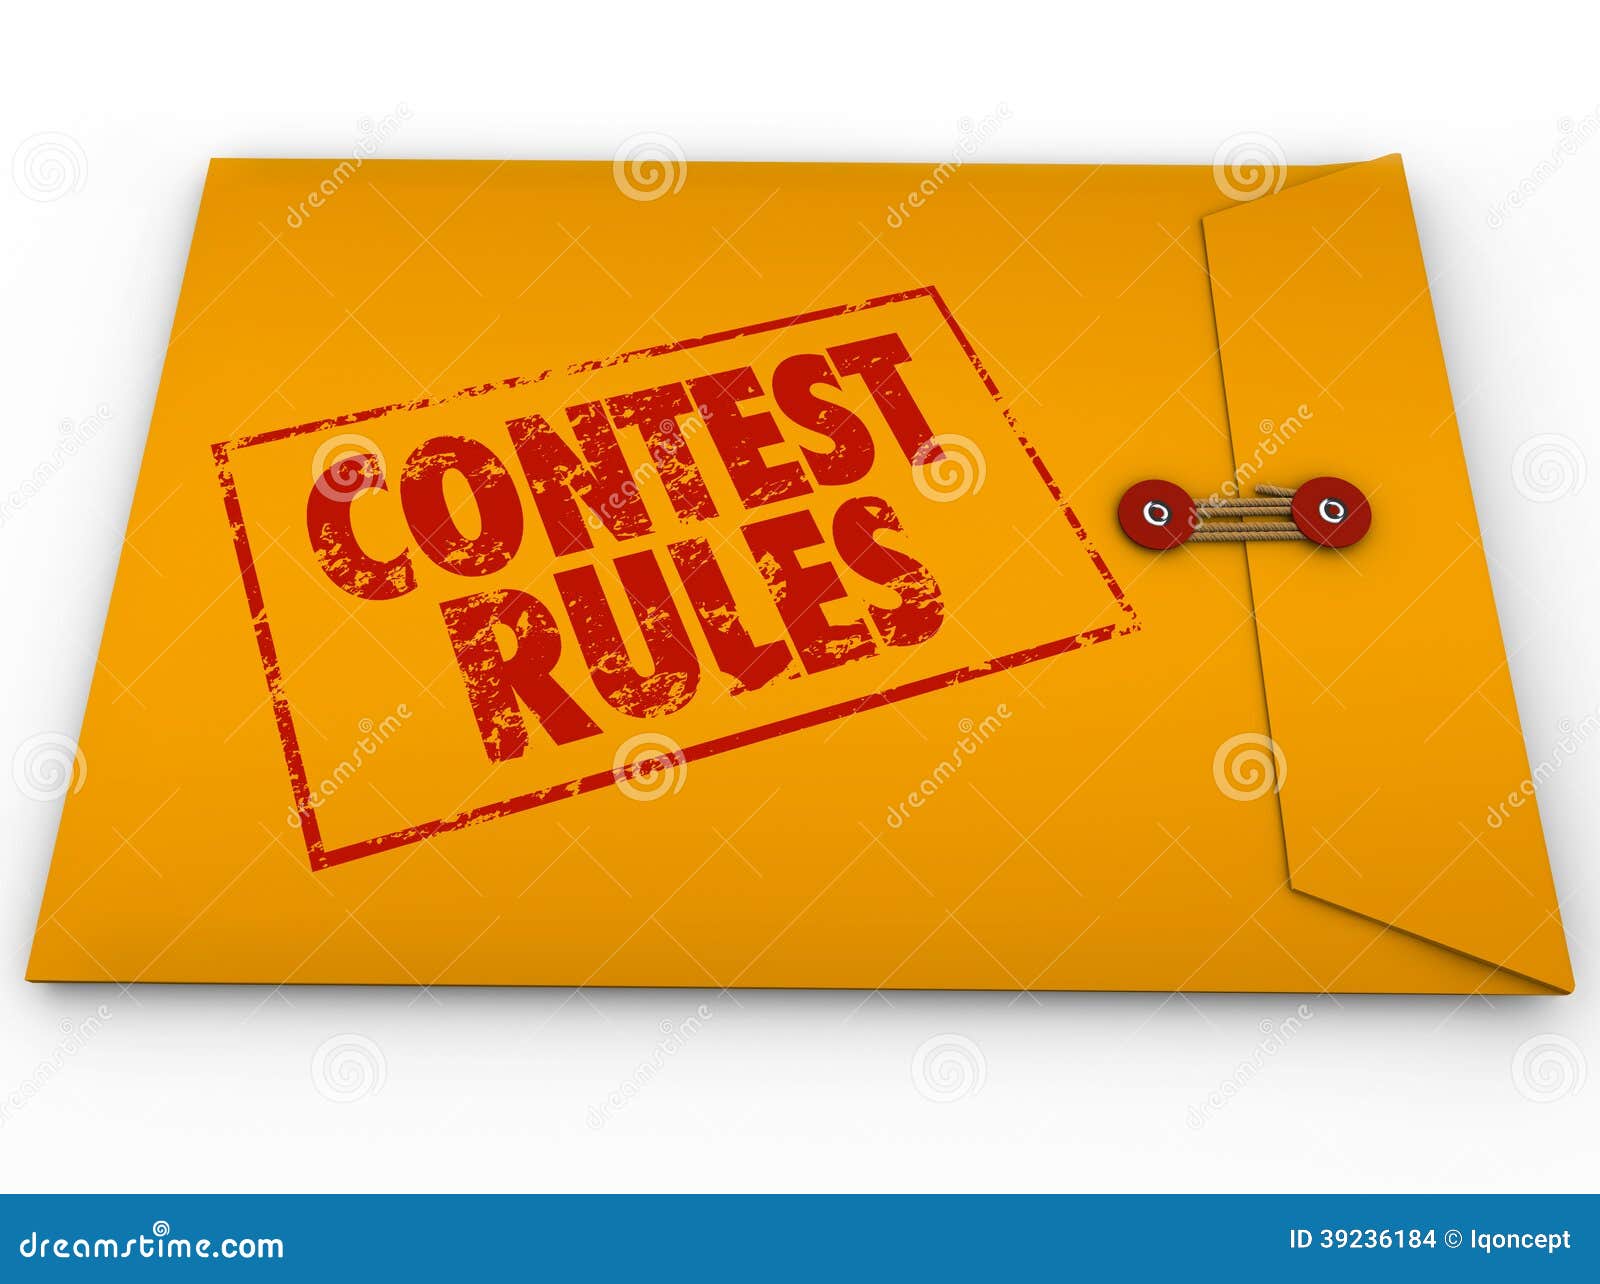 contest rules classified envelope terms conditions entry form